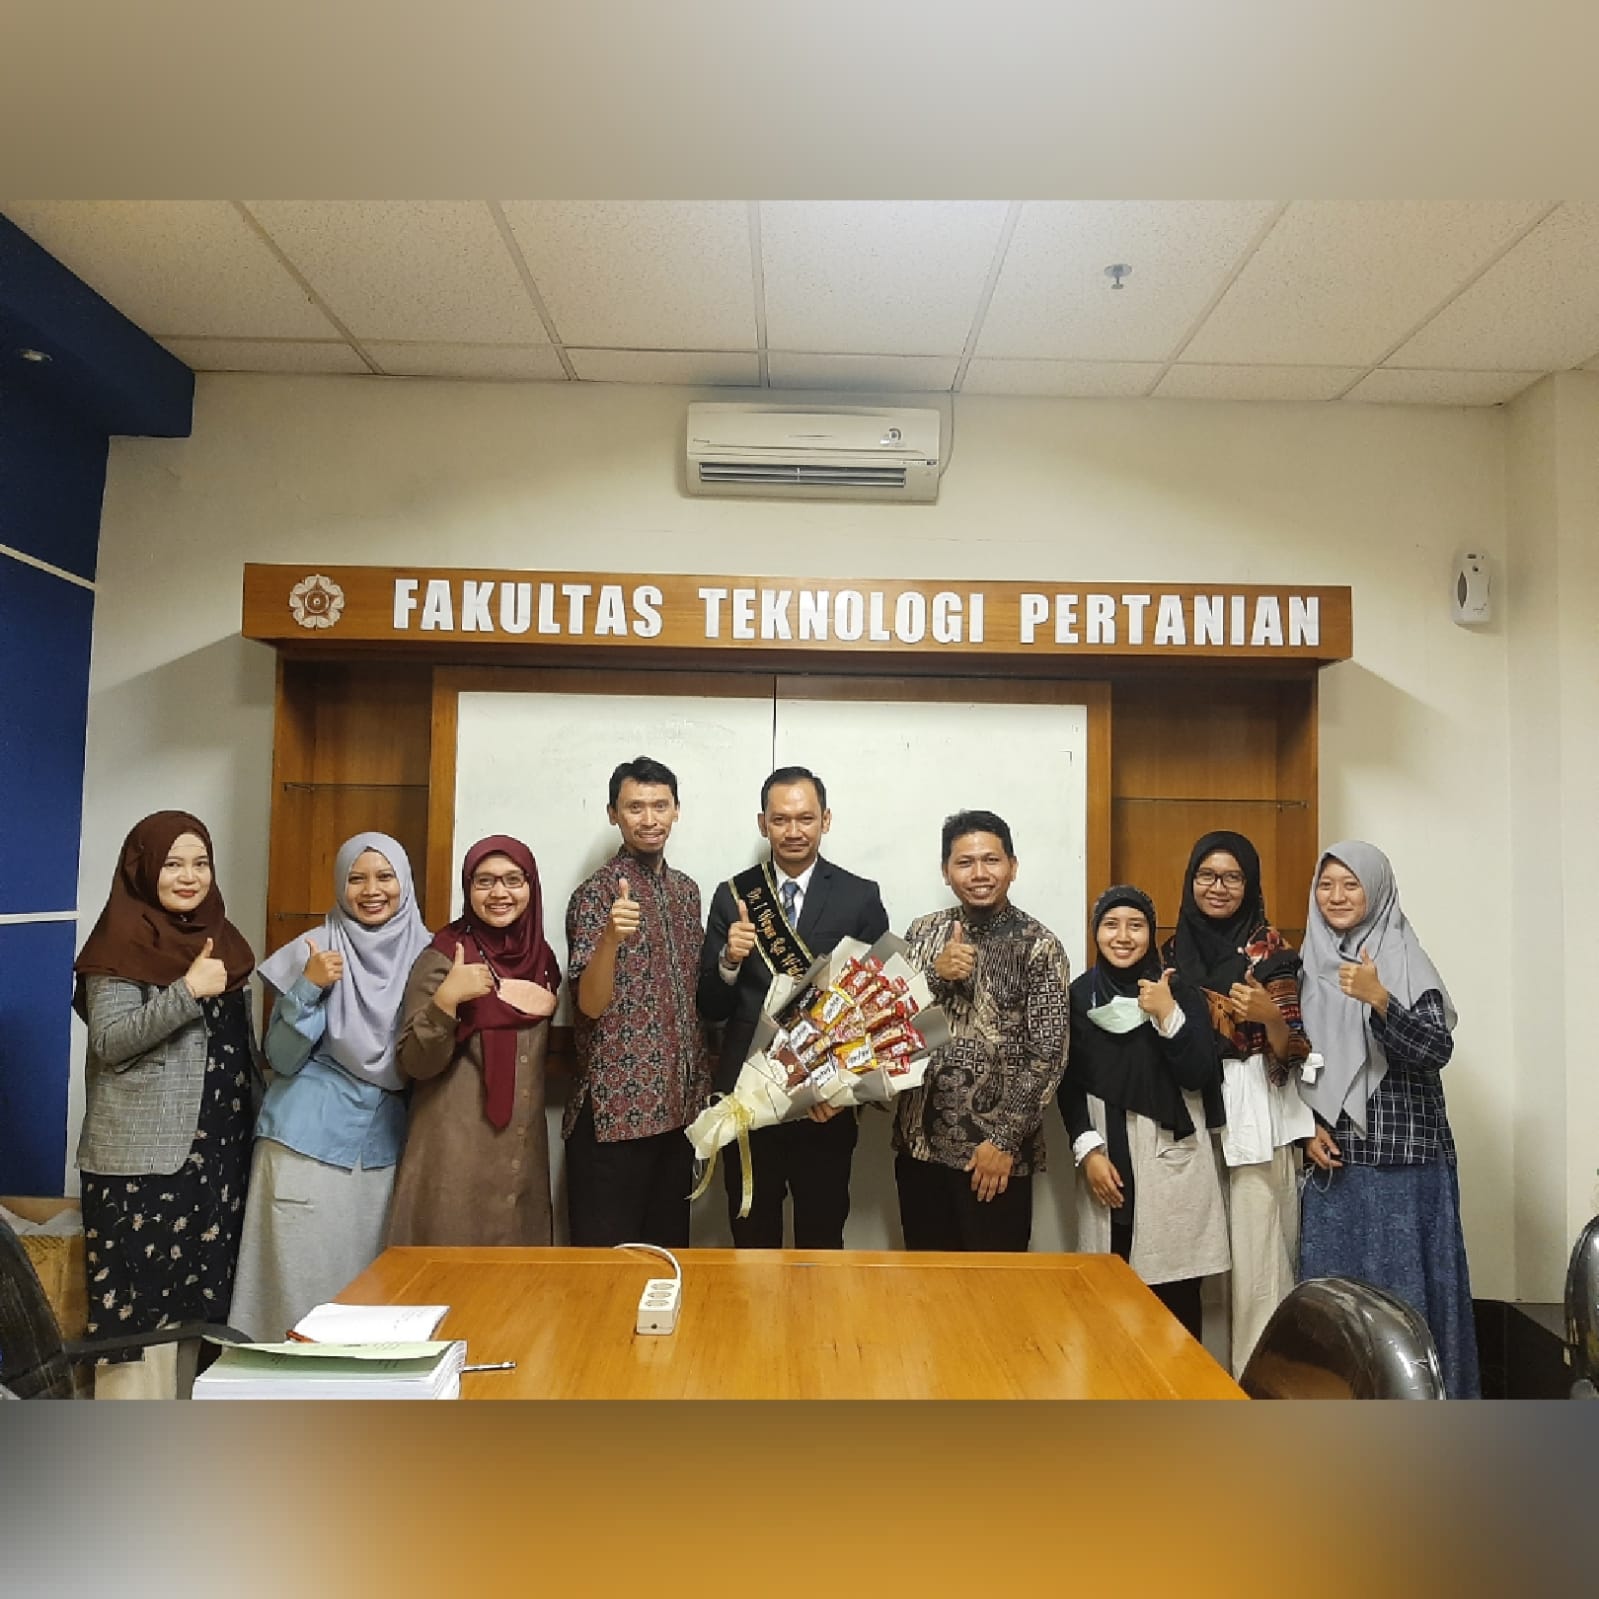 Increases Percentage of Doctoral Graduates in Food Technology Study Program, FTP Unud, Rai Widarta Successfully Achieves Doctoral Degree in Food Science through Modified Oleogel Application in Making Beef Sausage